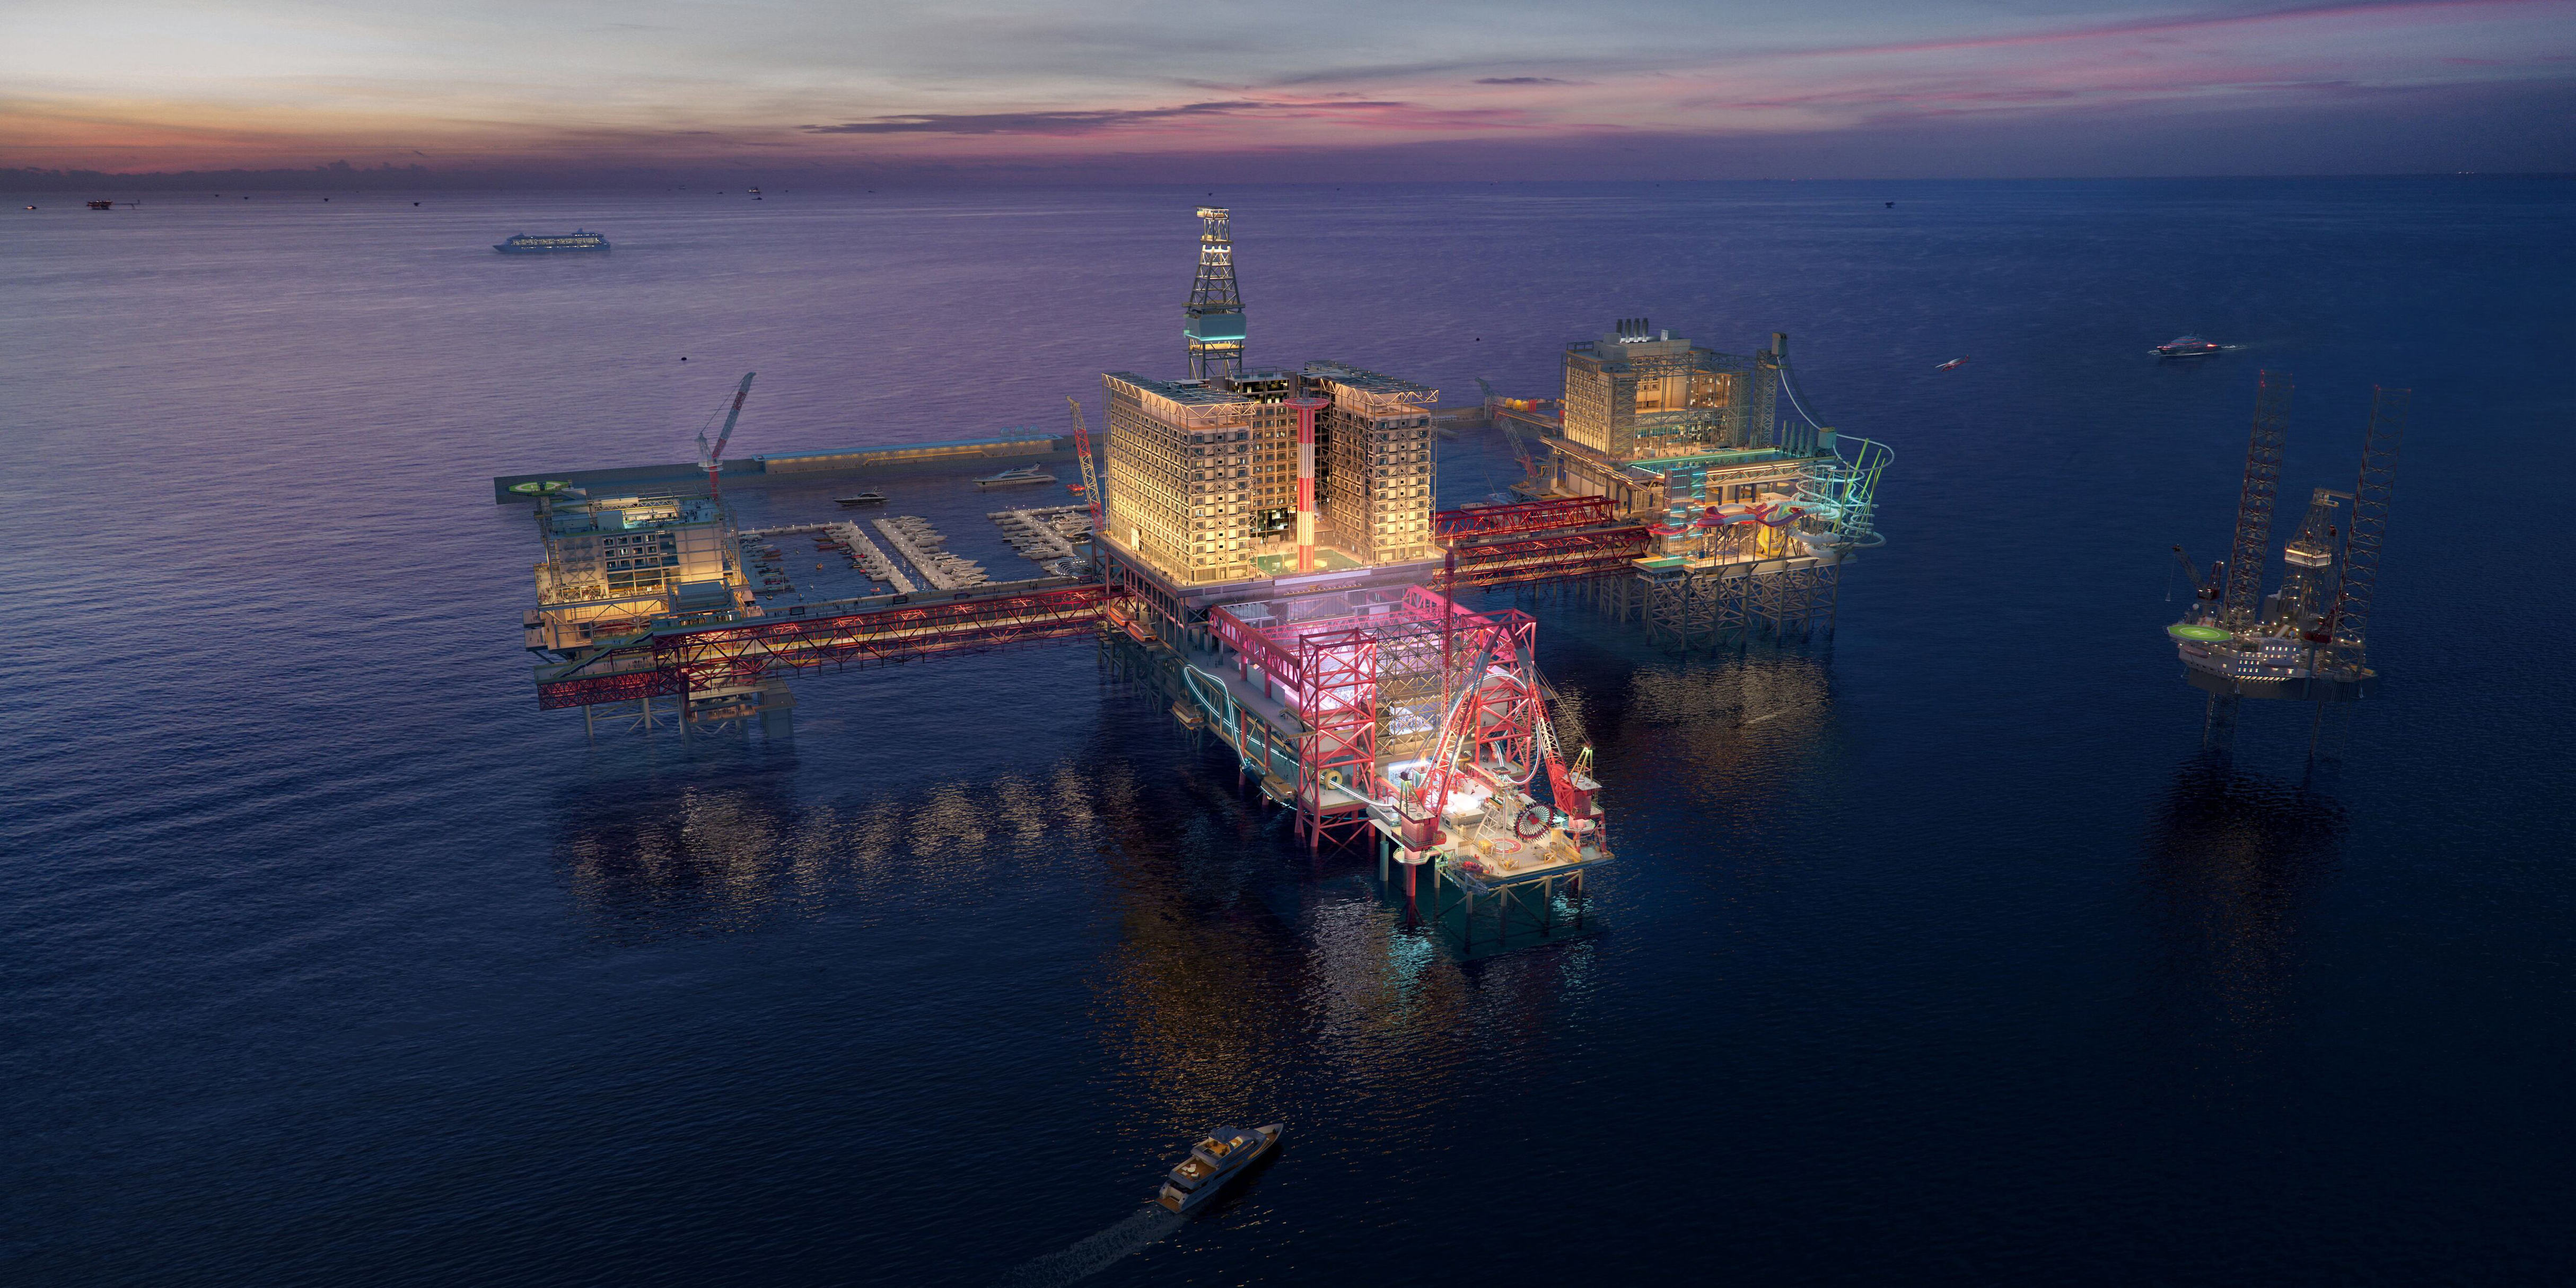 inside the rig: saudi arabia's offshore theme park that plans to draw one million visitors